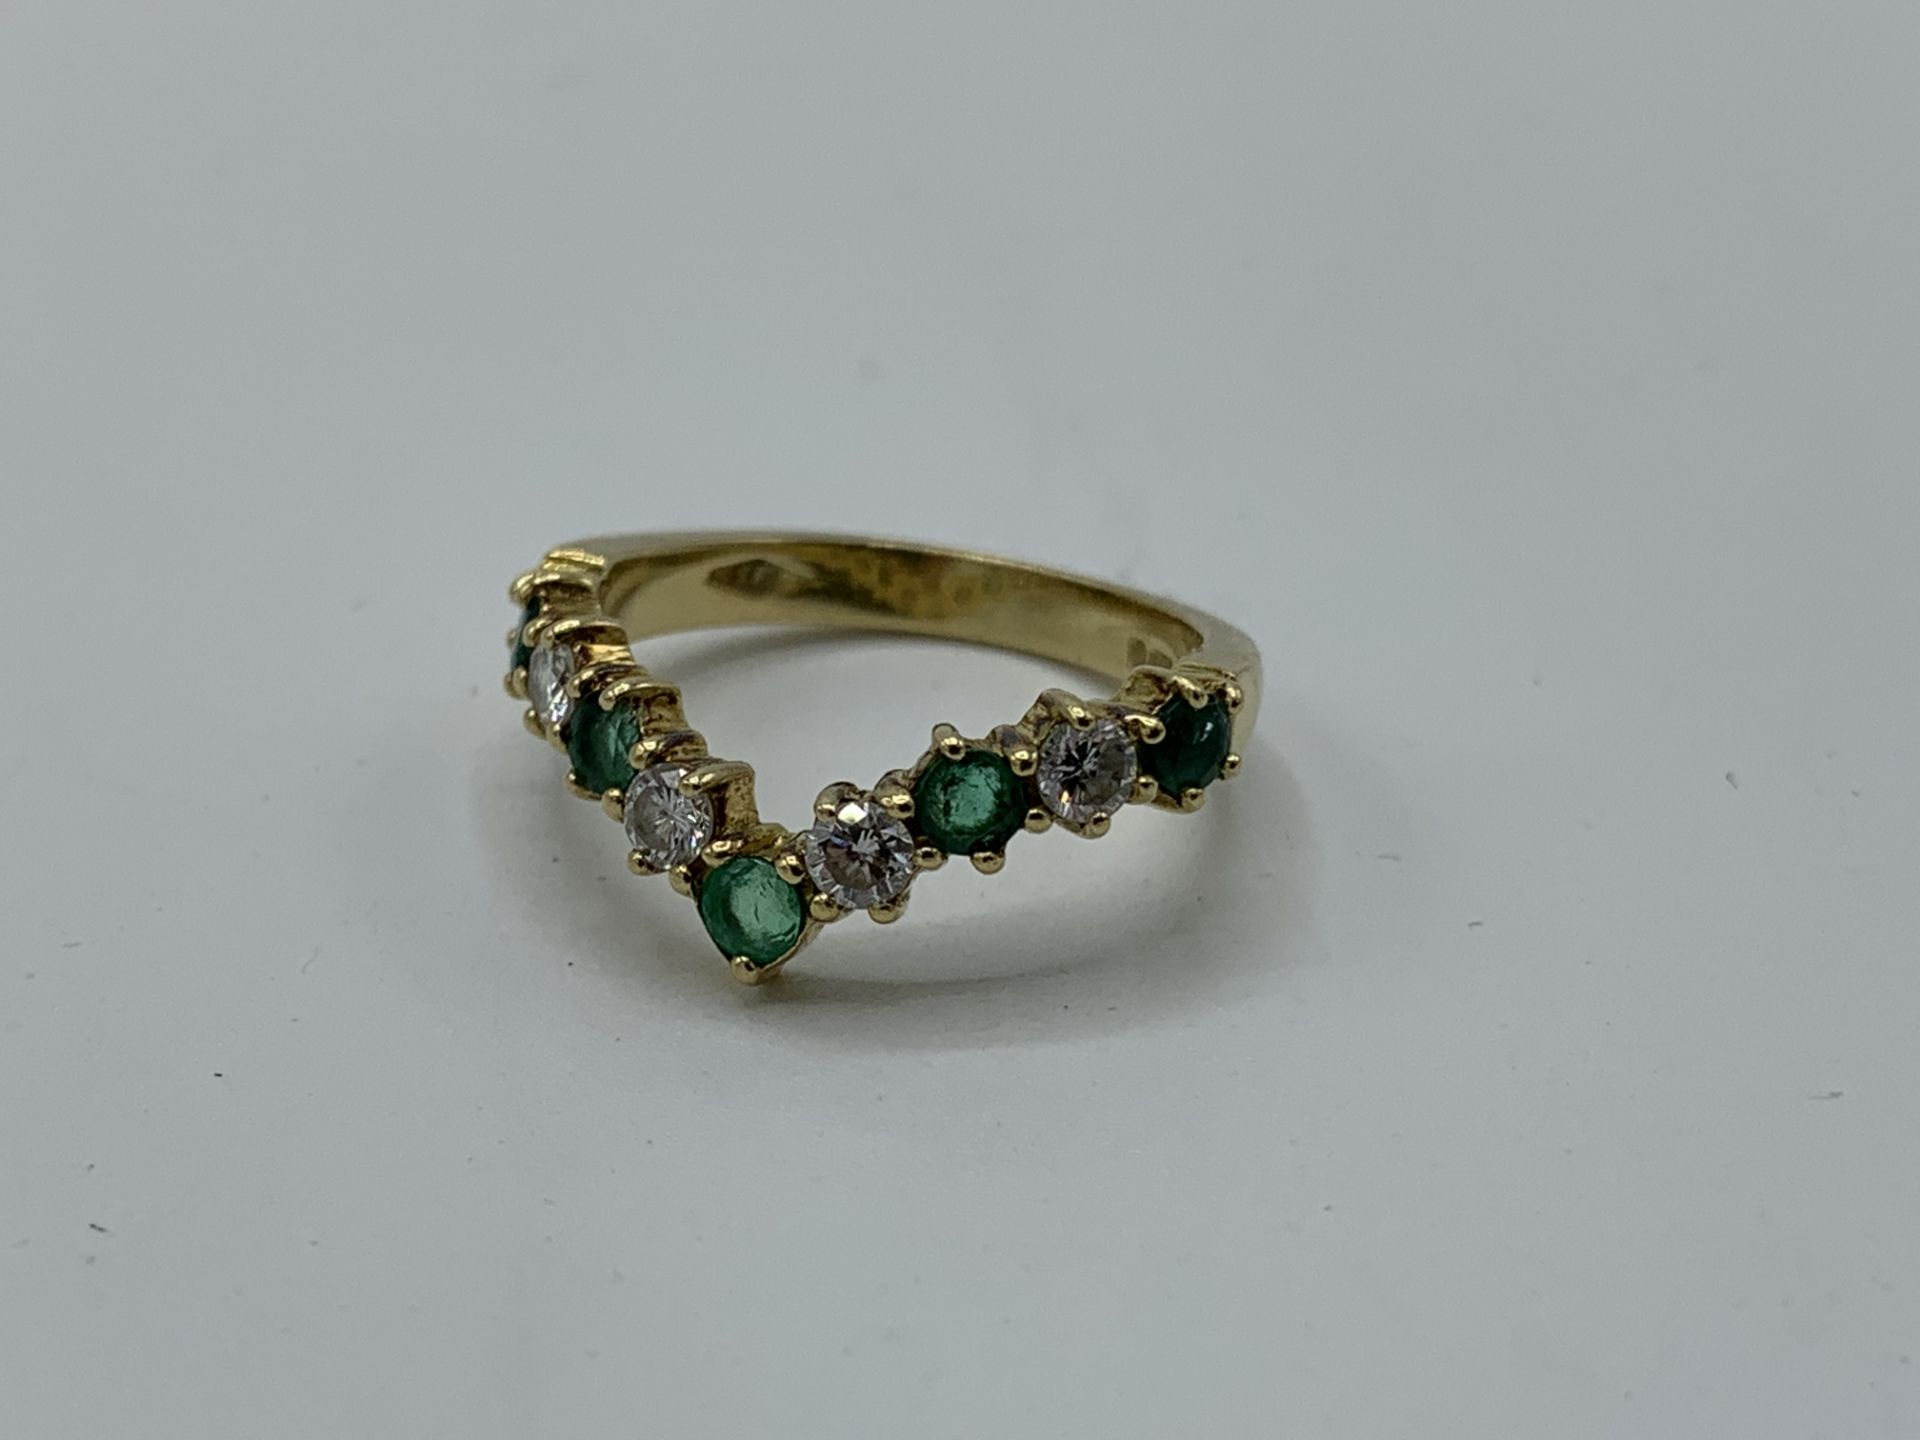 18ct gold diamond and emerald ring size I, weight 2.9gms. Estimate £150-180. - Image 2 of 2